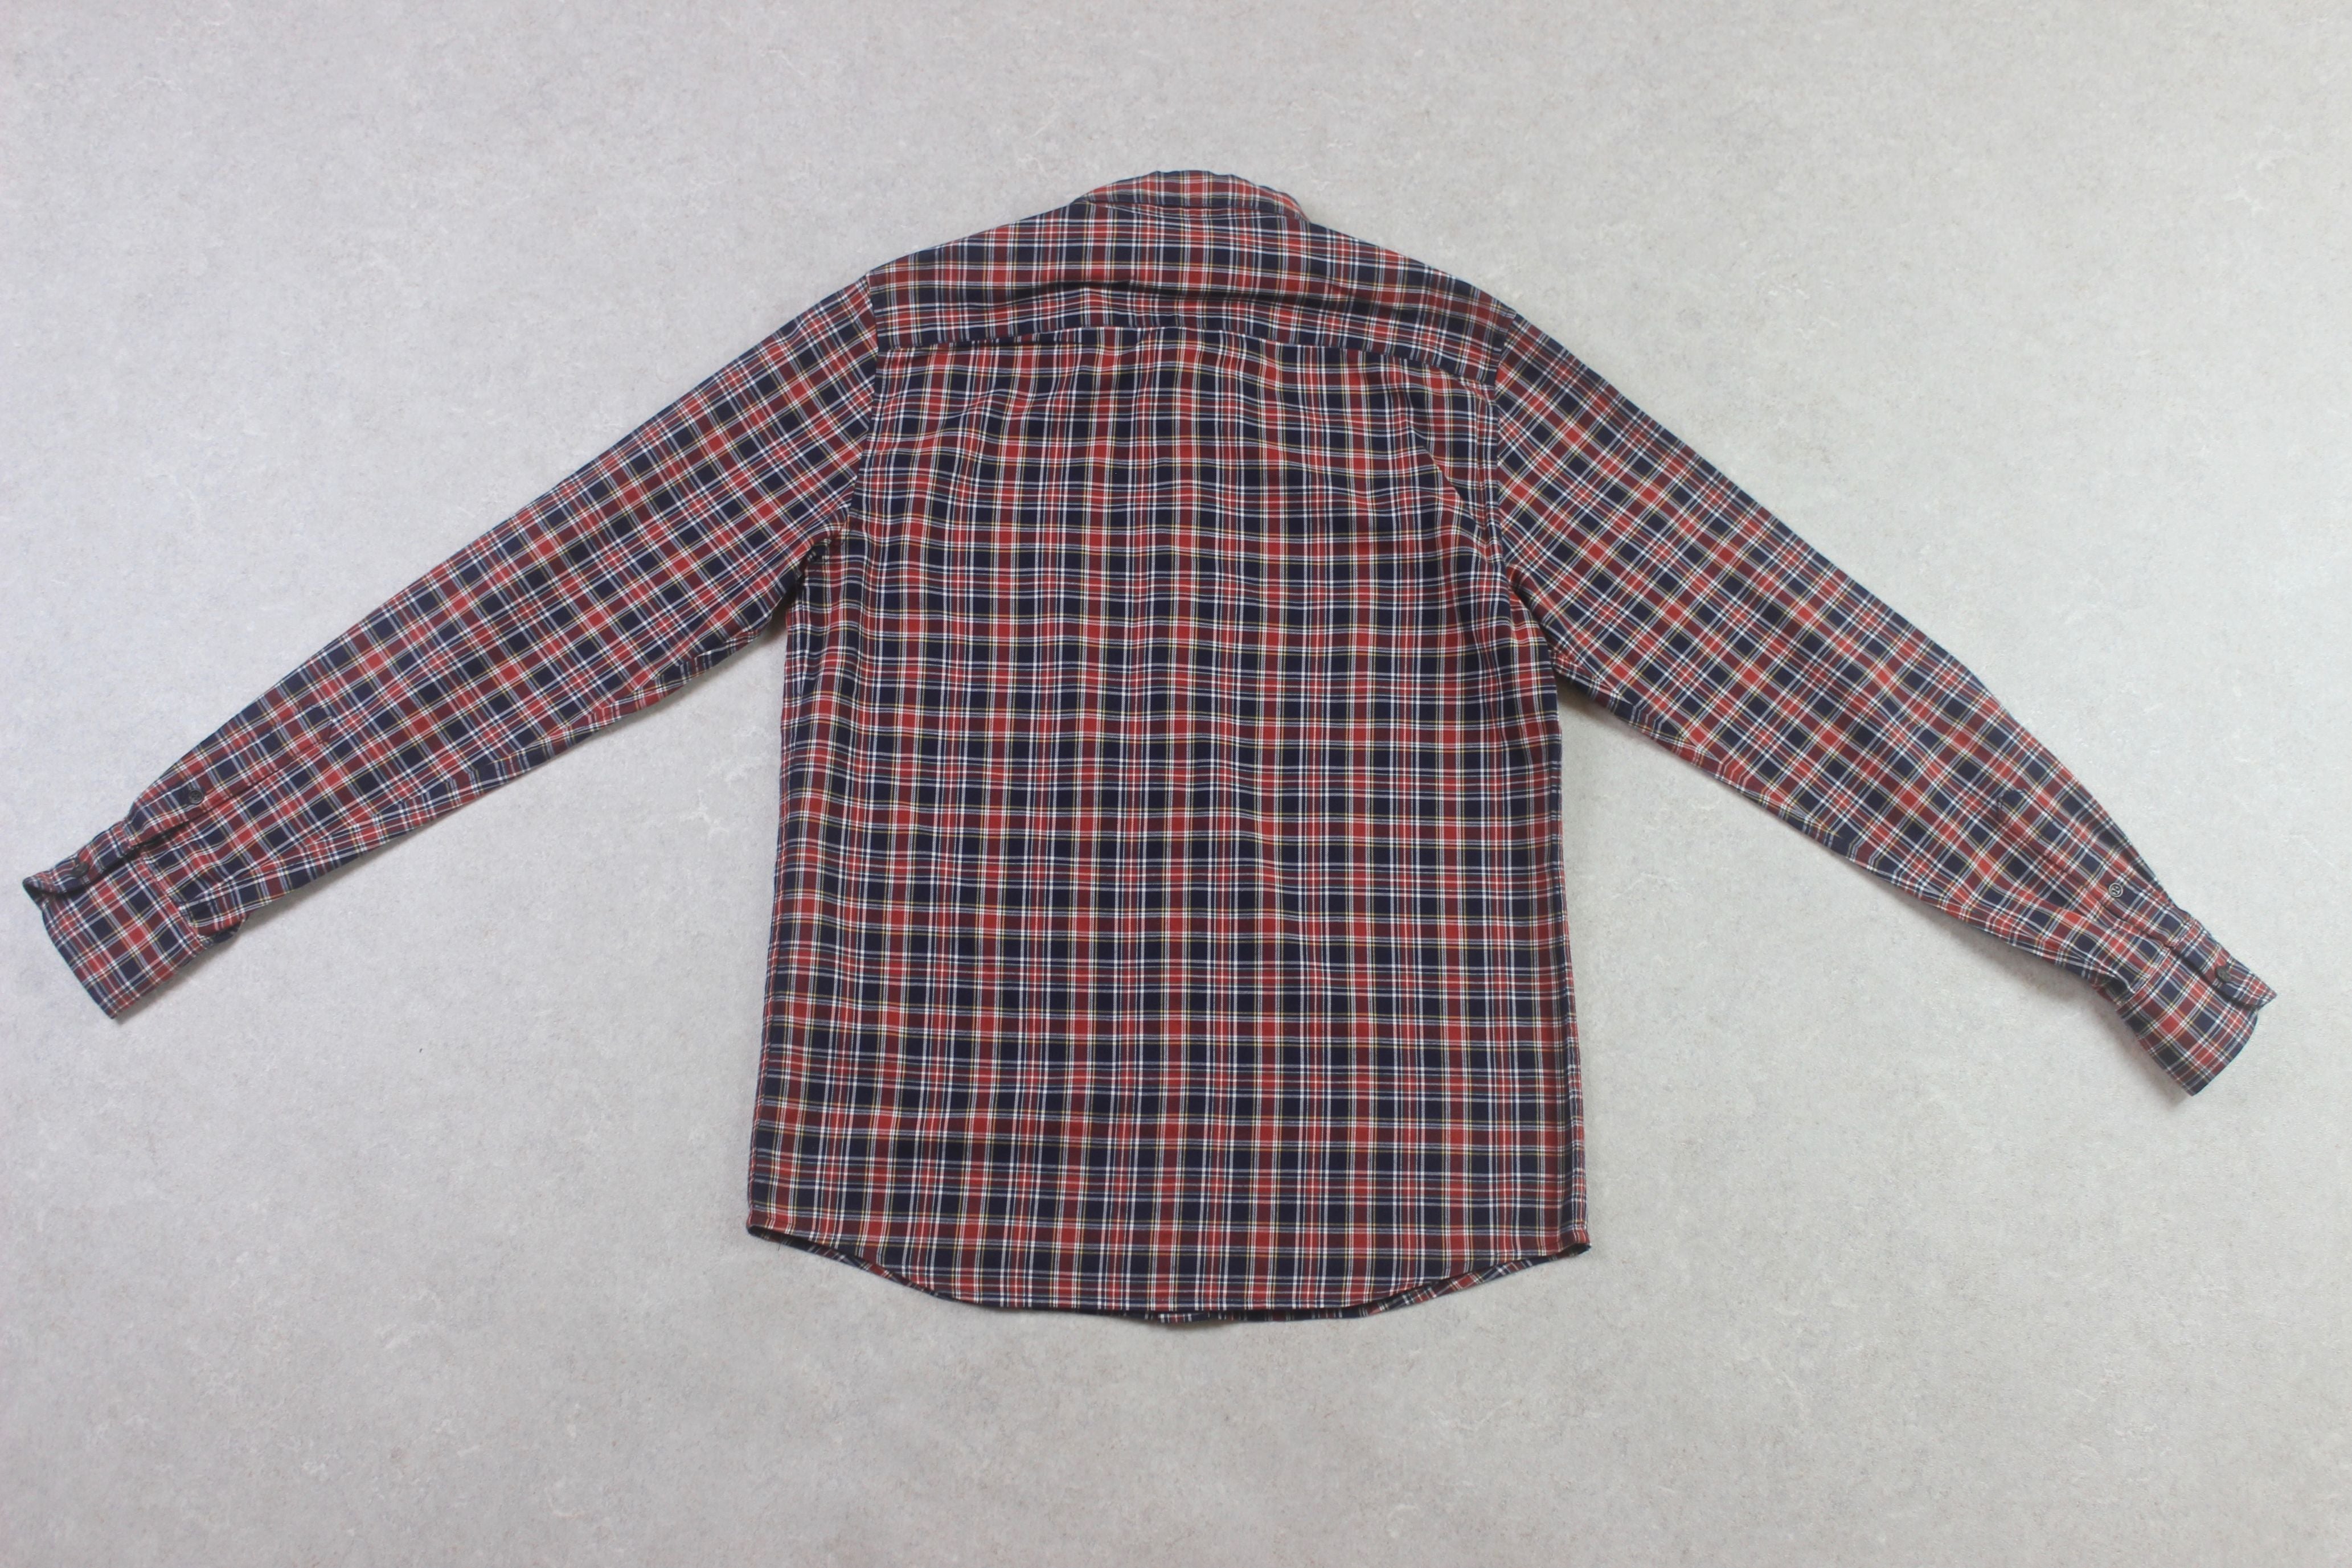 A.P.C. - Shirt - Red/Navy Blue Check - Small